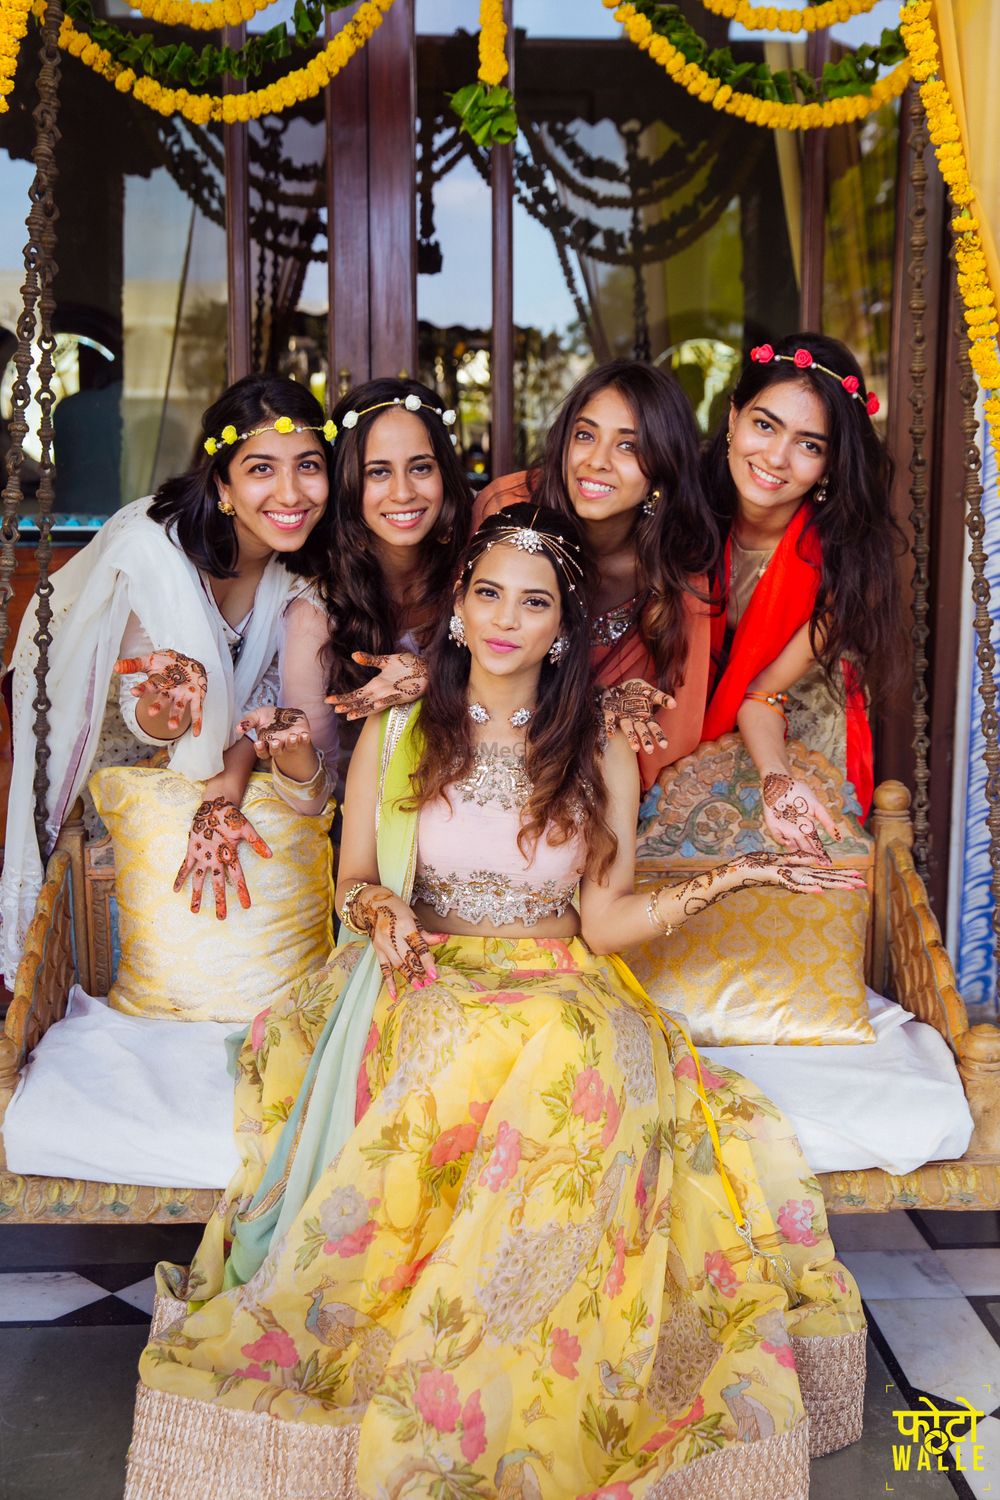 Photo of Bride and bridesmaids on mehendi with wreaths